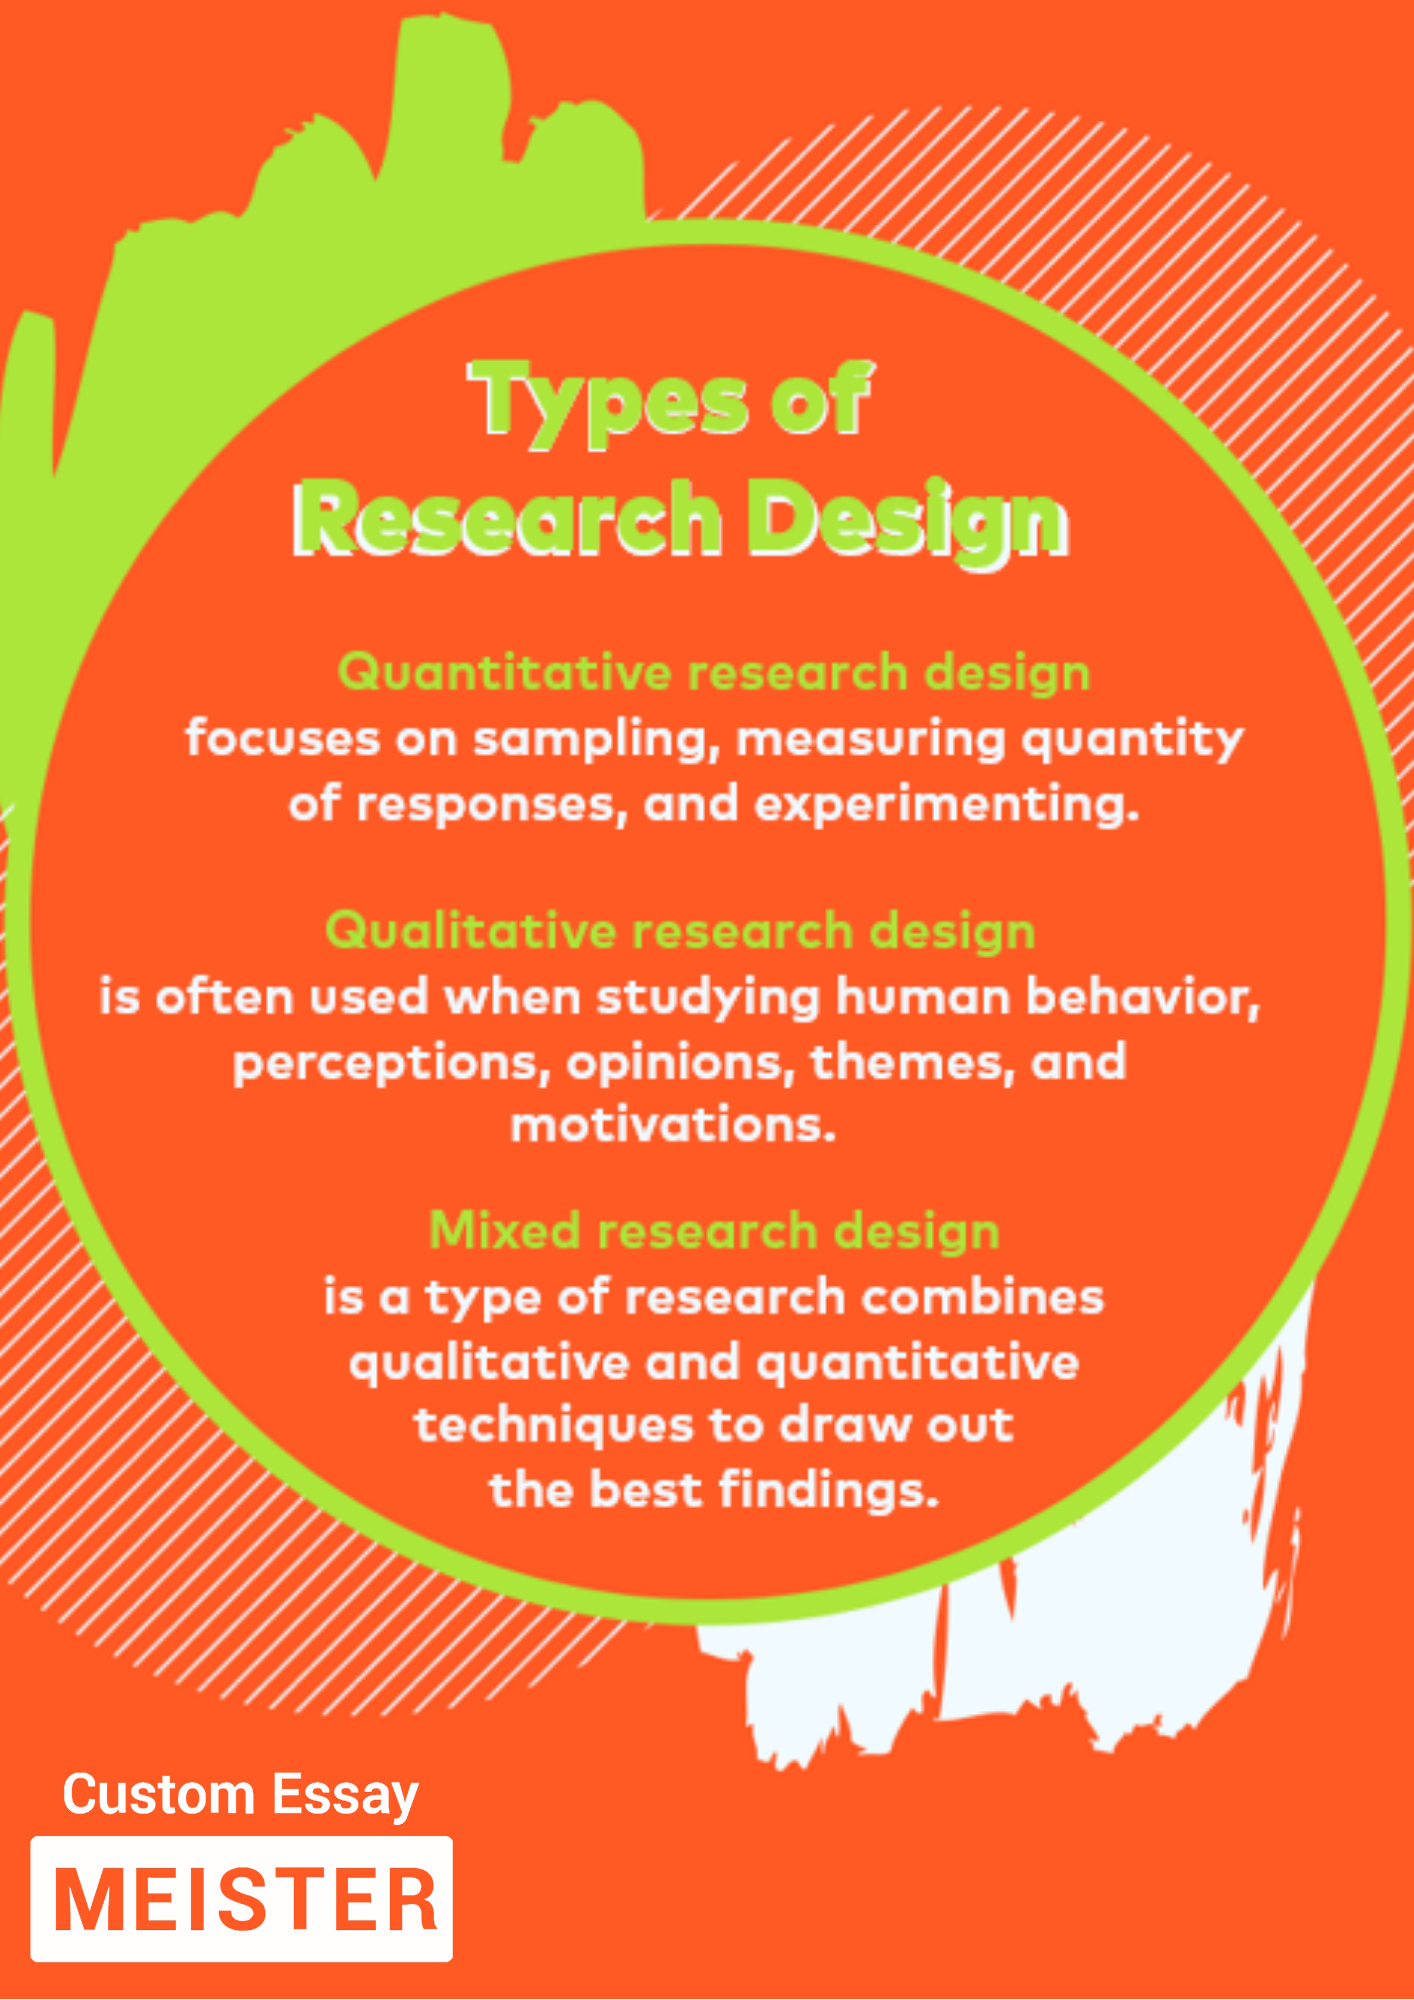 reflection about research design